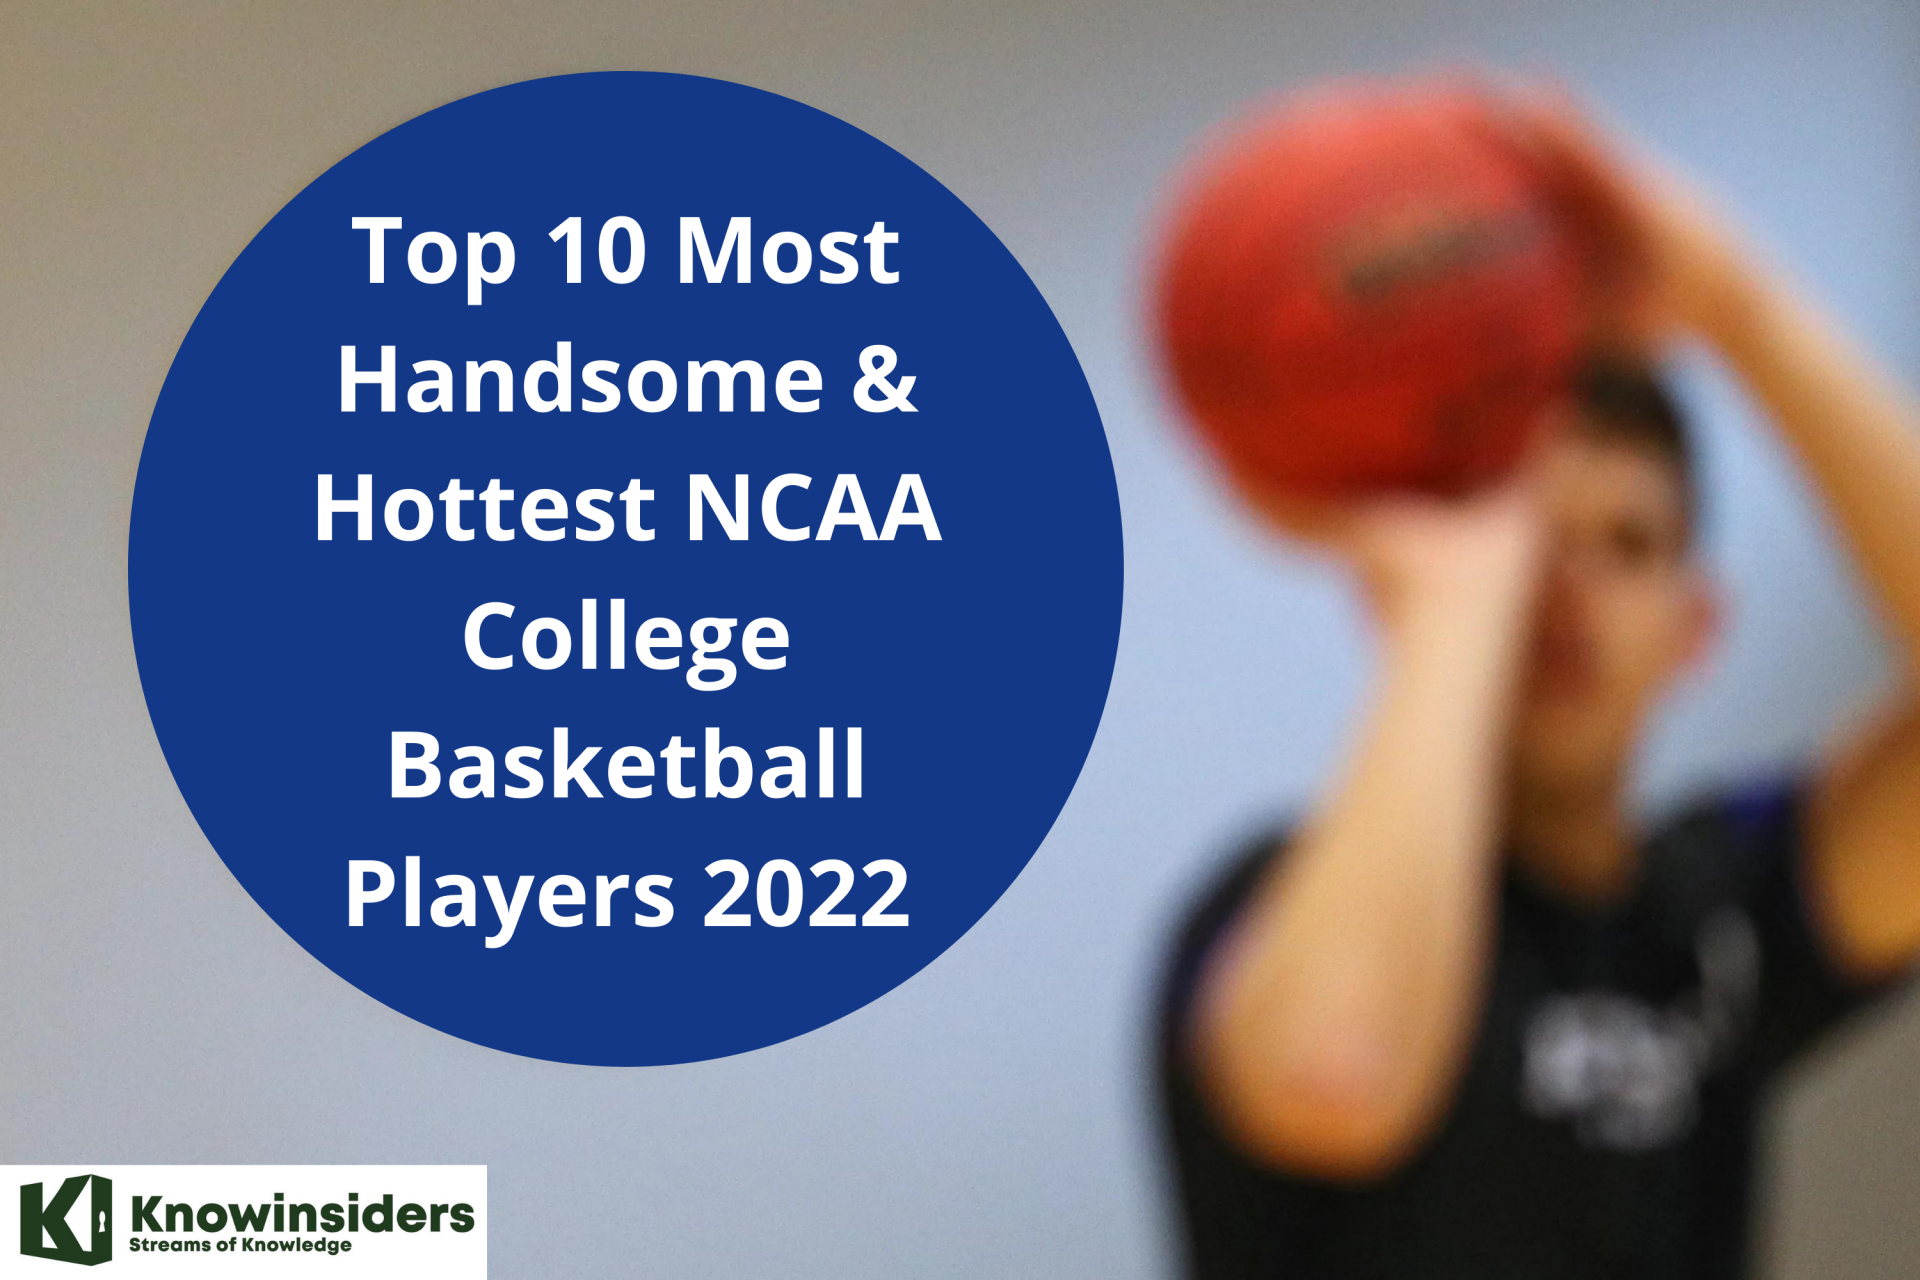 Top 10 Most Handsome & Hottest NCAA College Basketball Players 2022/2023